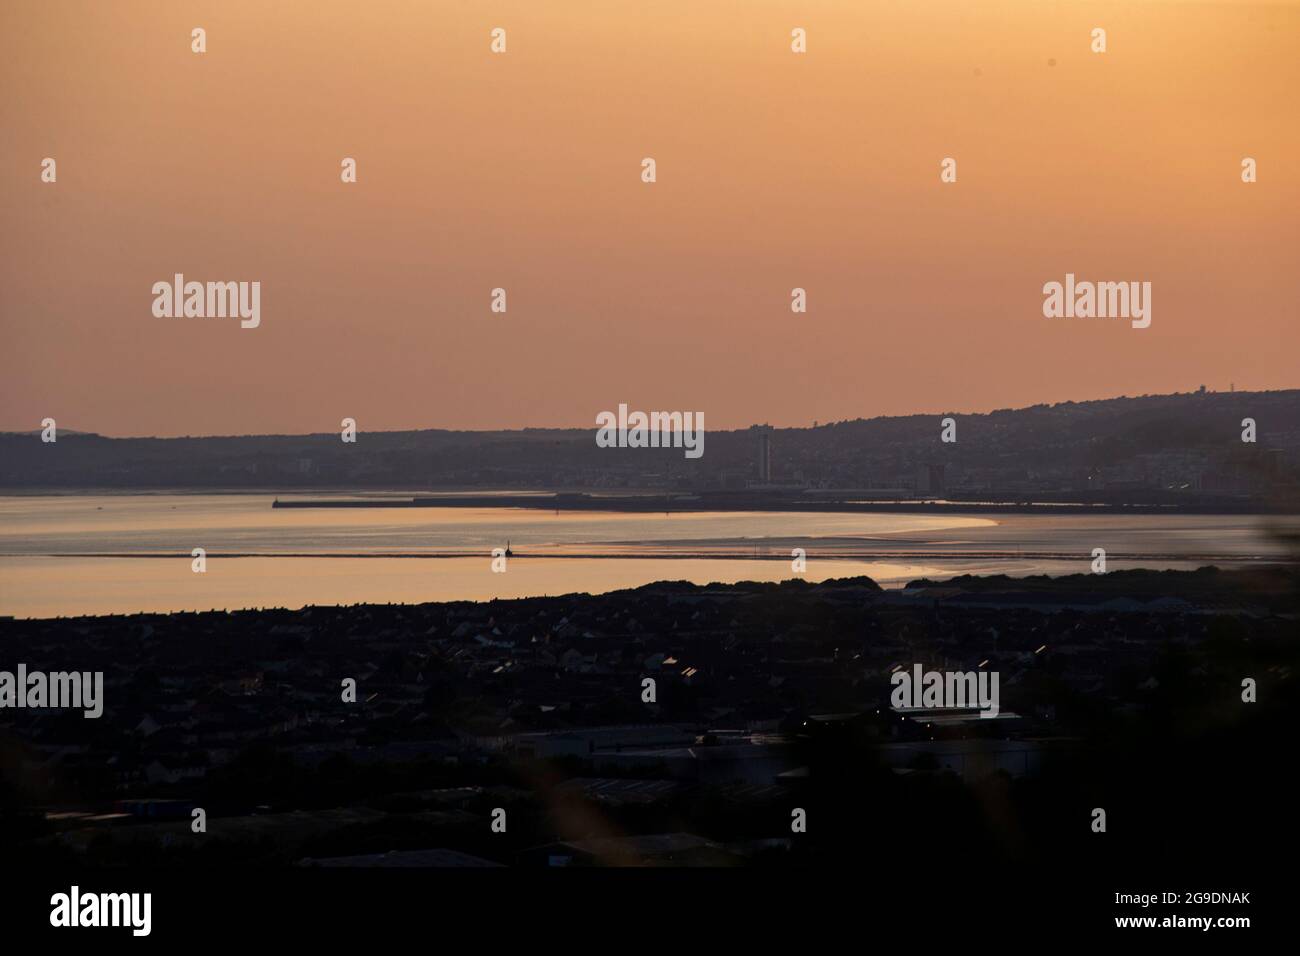 A view towards Swansea from Port Talbot, South Wales during sunset on the 20th July 2021. Credit: Lewis Mitchell Stock Photo